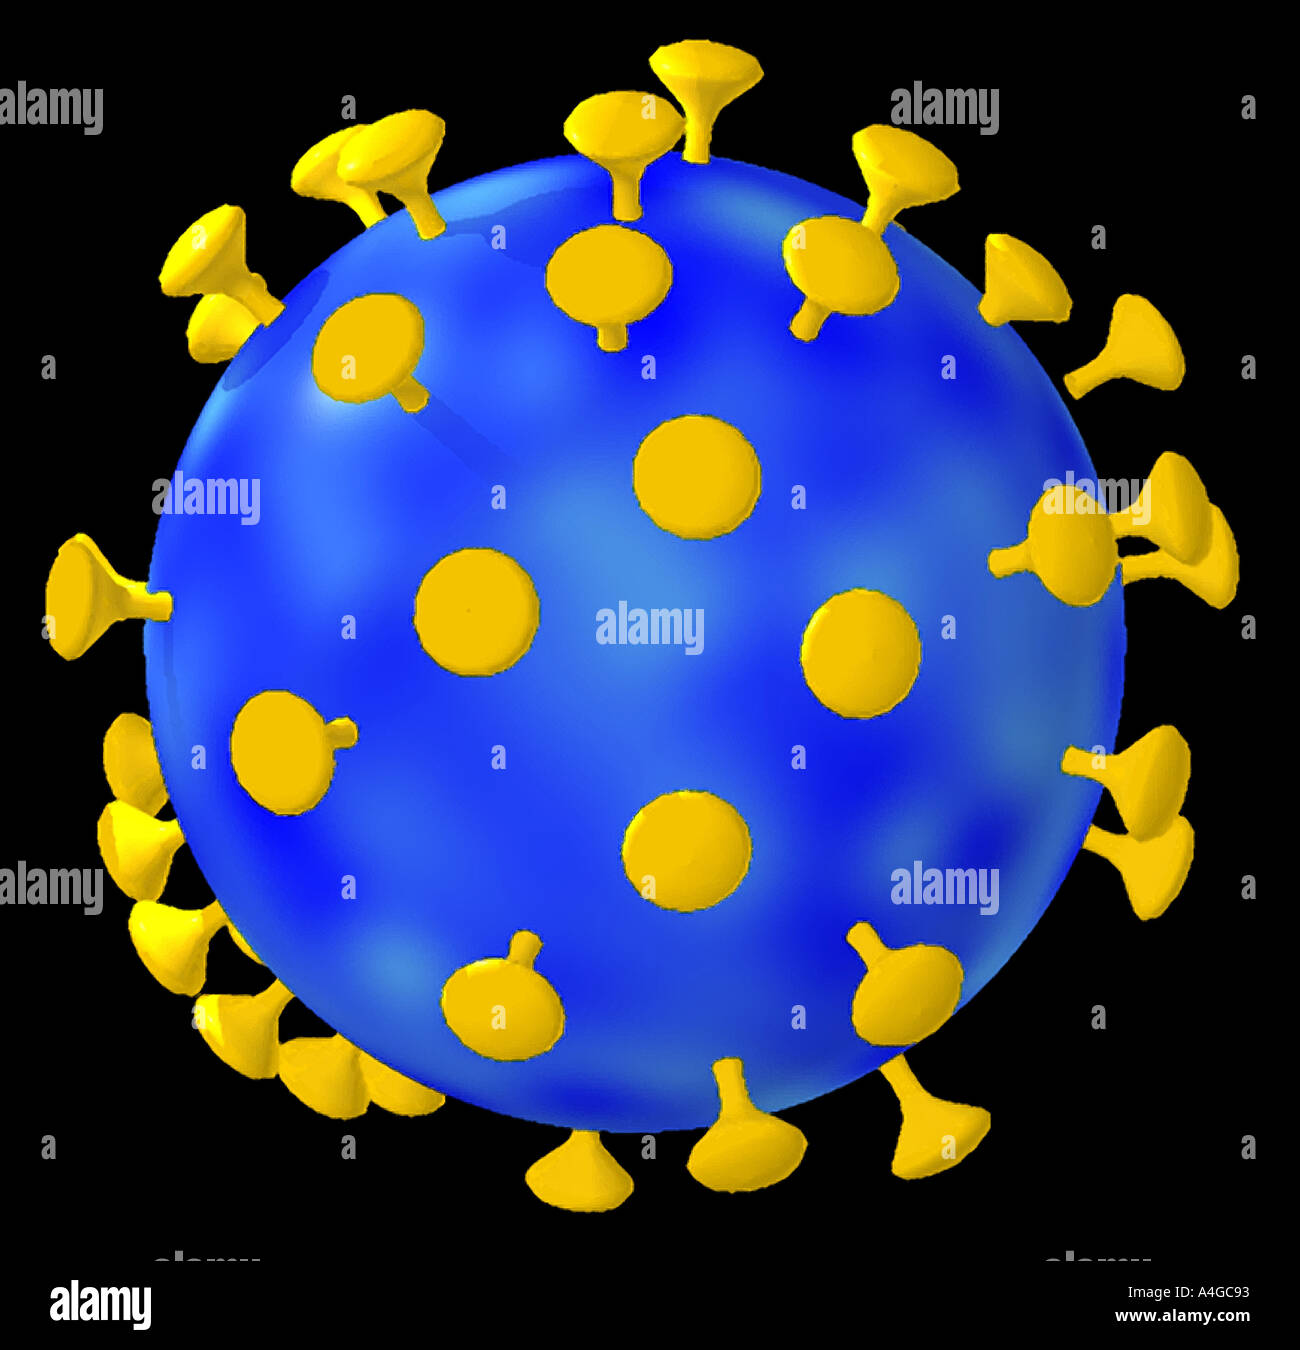 Model of HIV human immunodeficiency virus showing the surface of the virus coated with glycoprotein knobs  Stock Photo